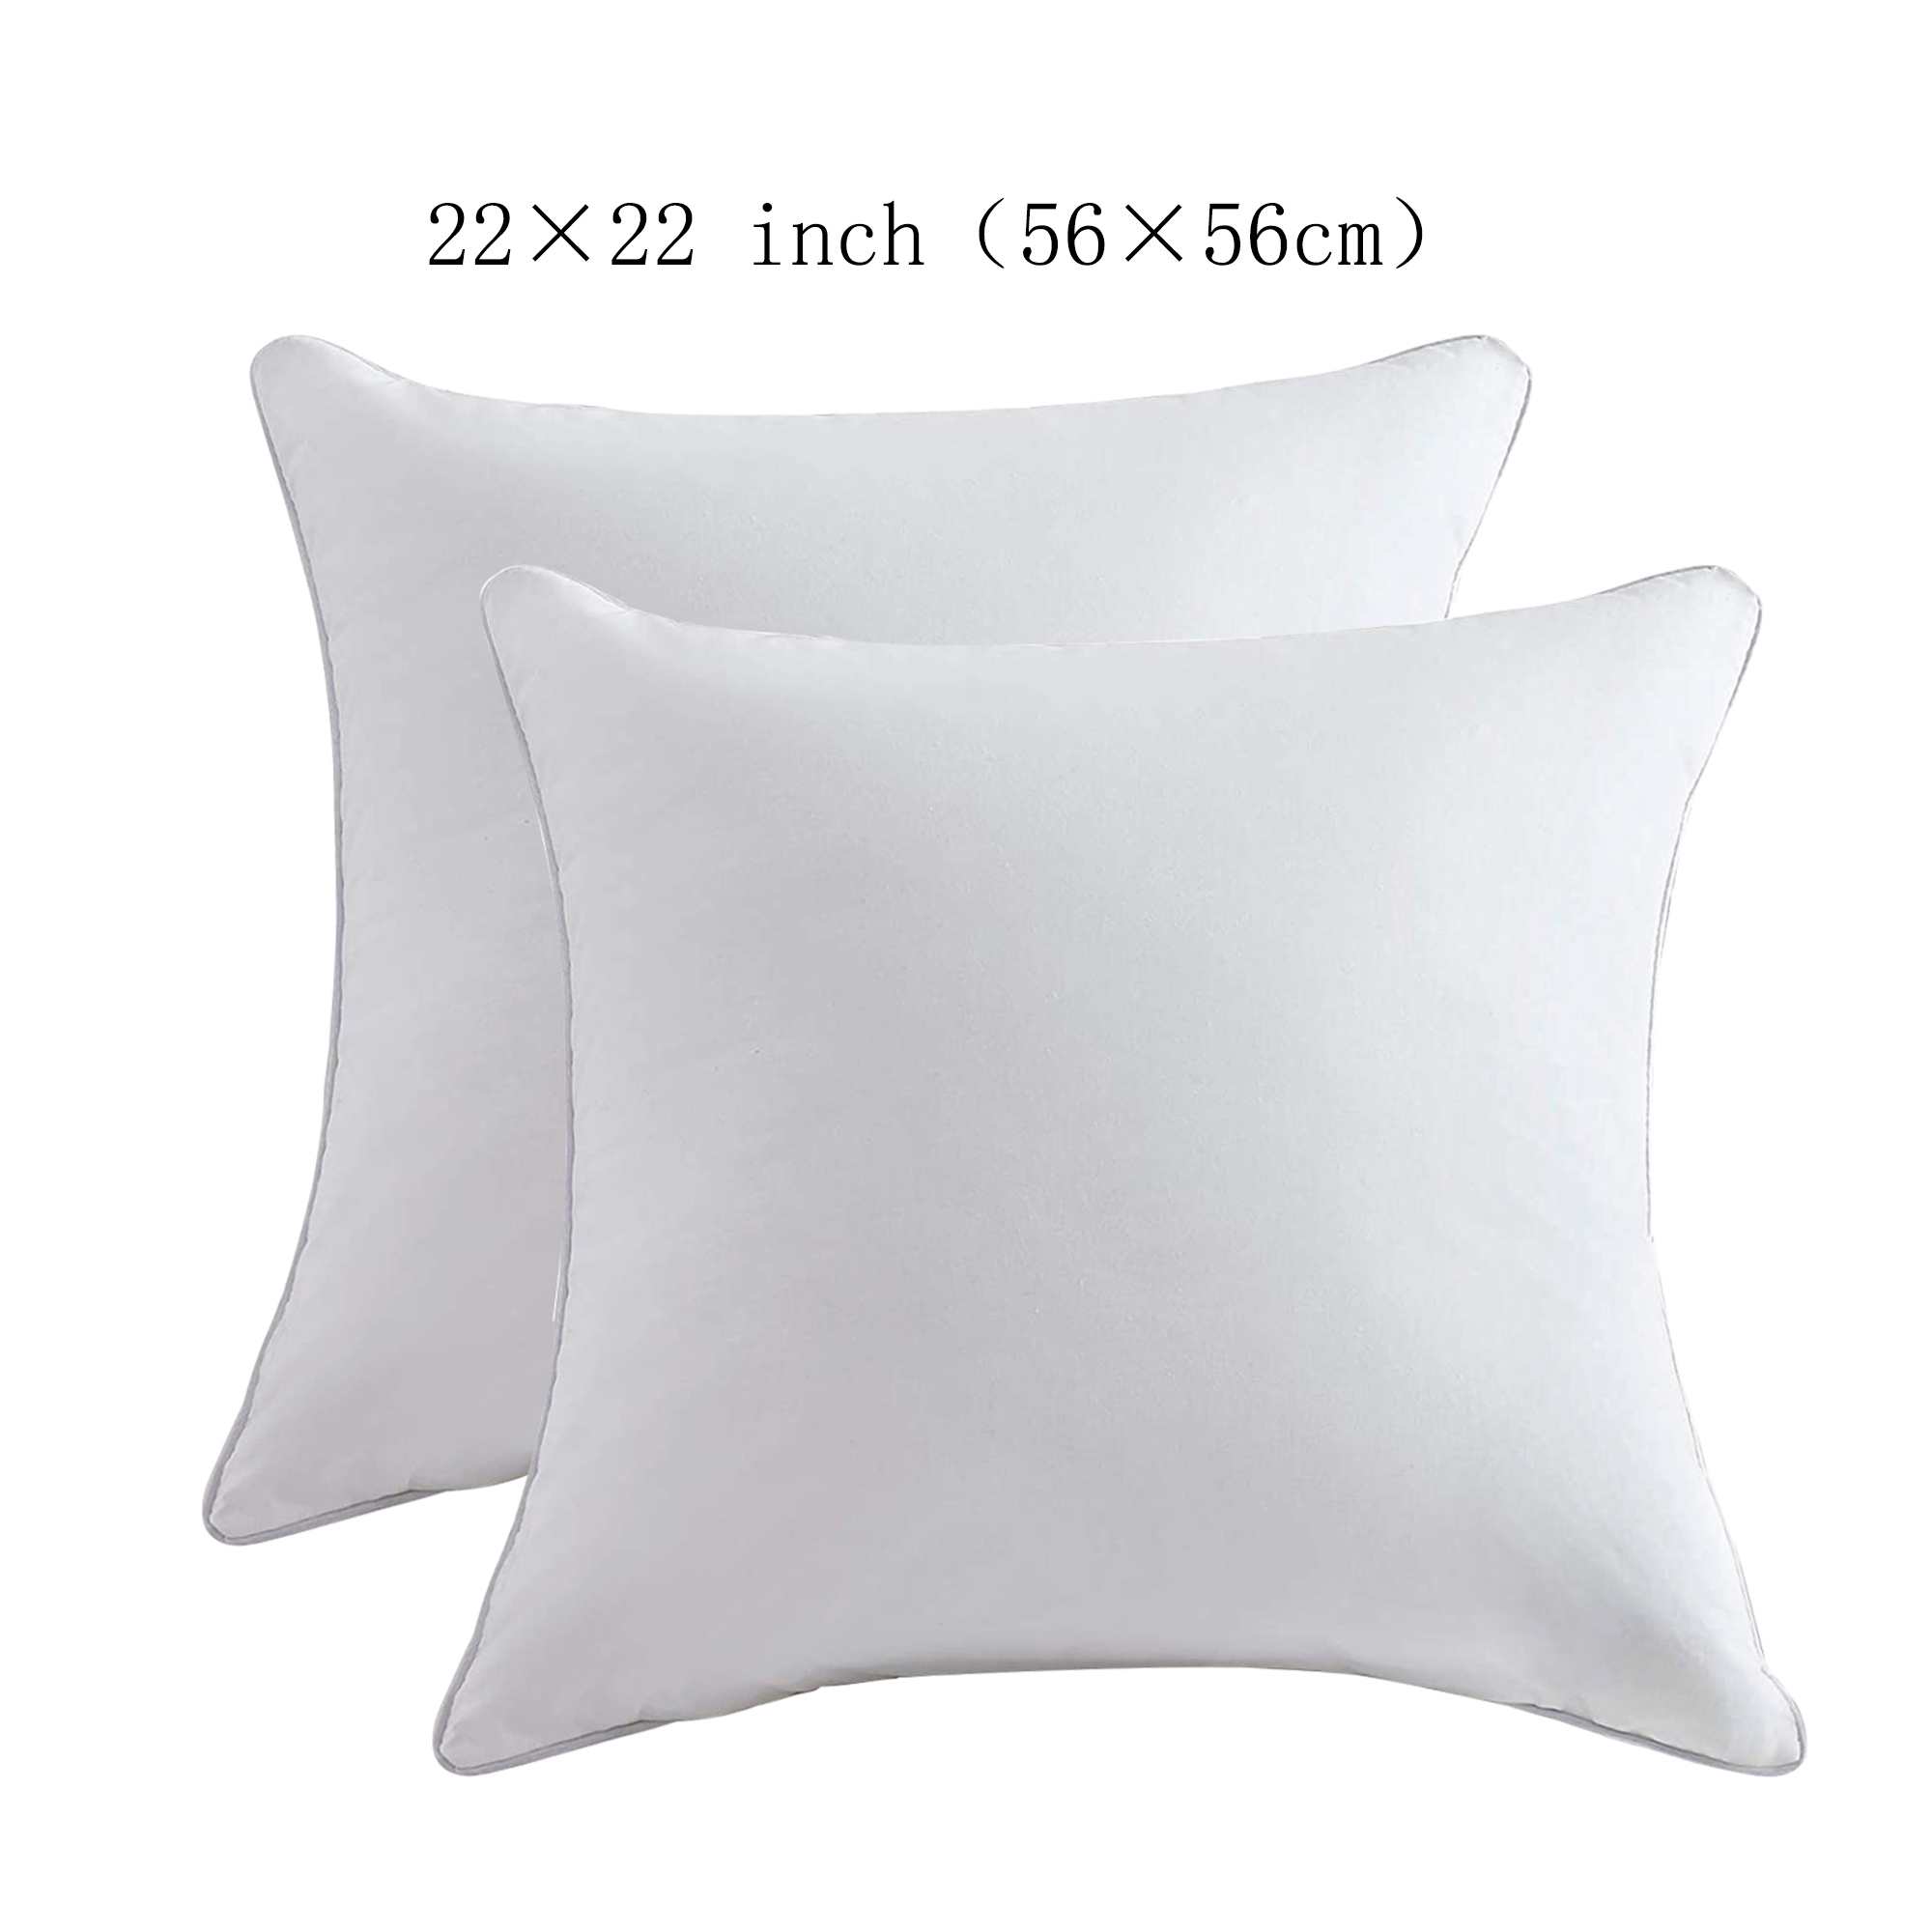 1pc Christmas Letter Print Pillow Cover (without Pillow Insert), Modern  Style Linen Material 45cm*45cm/17.72in*17.72in Square Single-sided Printed  Decorative Throw Pillowcase With Zipper Closure, Soft & Comfortable,  Suitable For Christmas